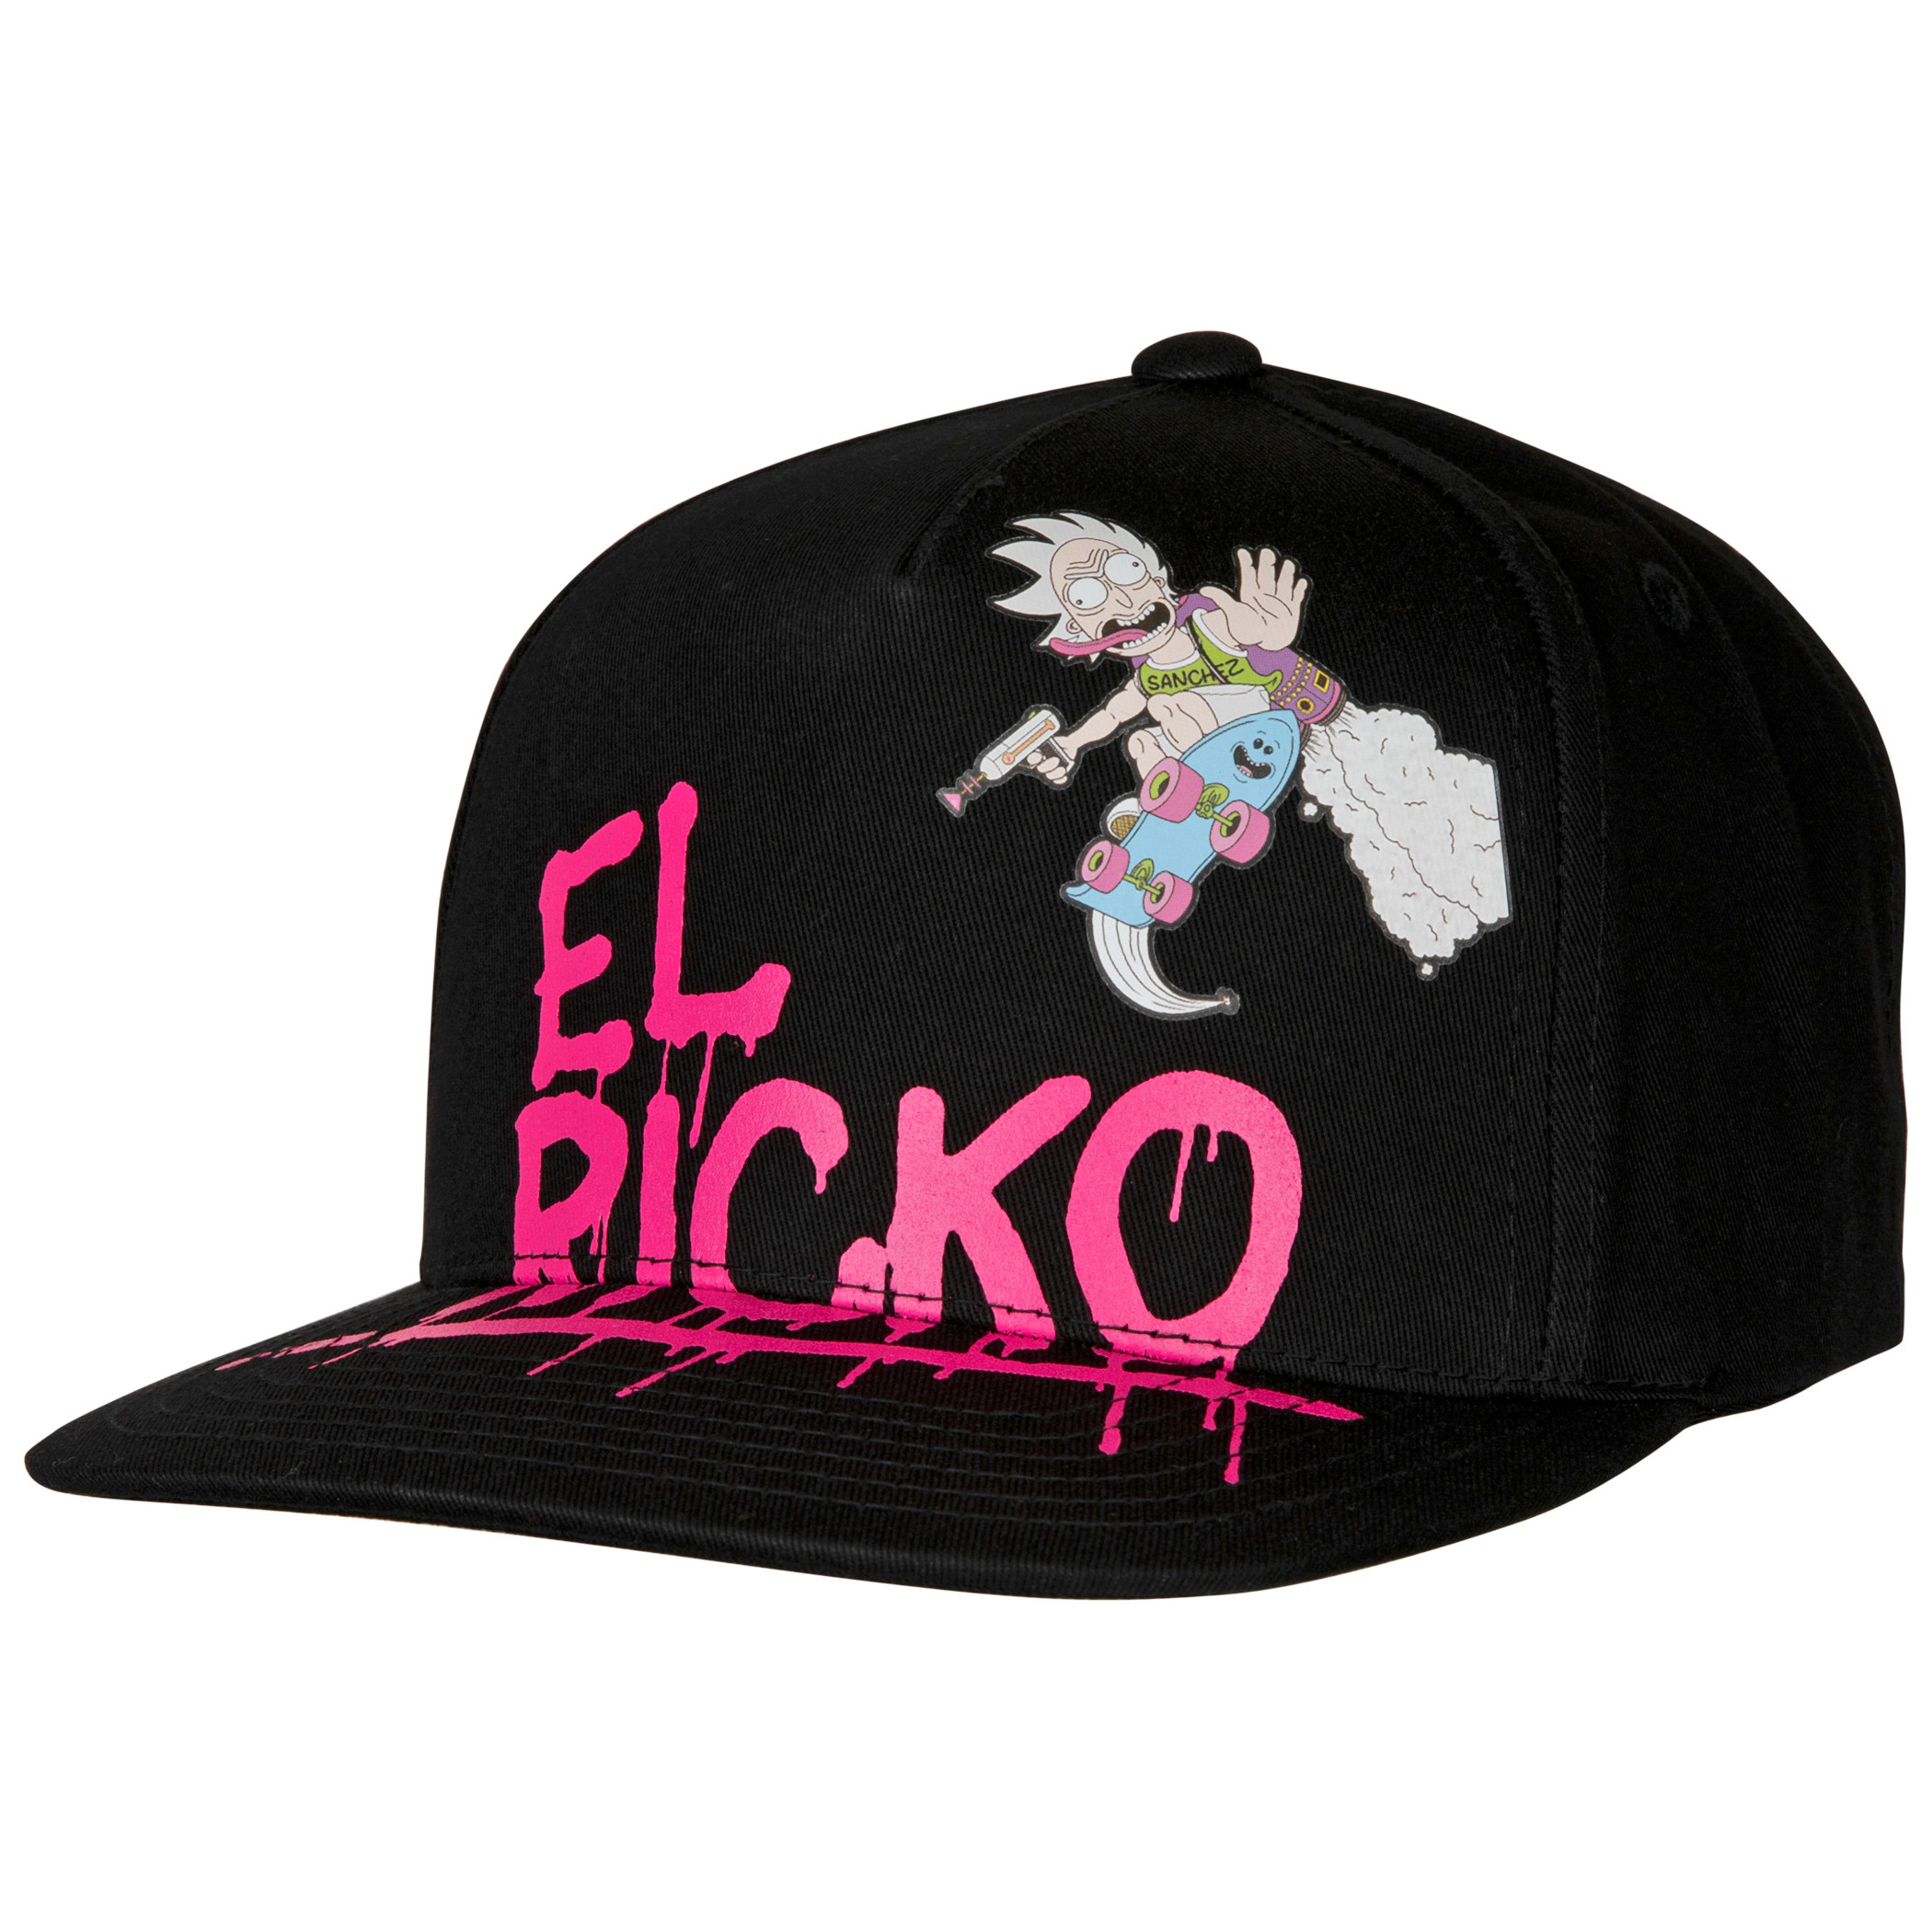 Rick And Morty Sublimated With 3D Emblem Flatbill Snapback Hat